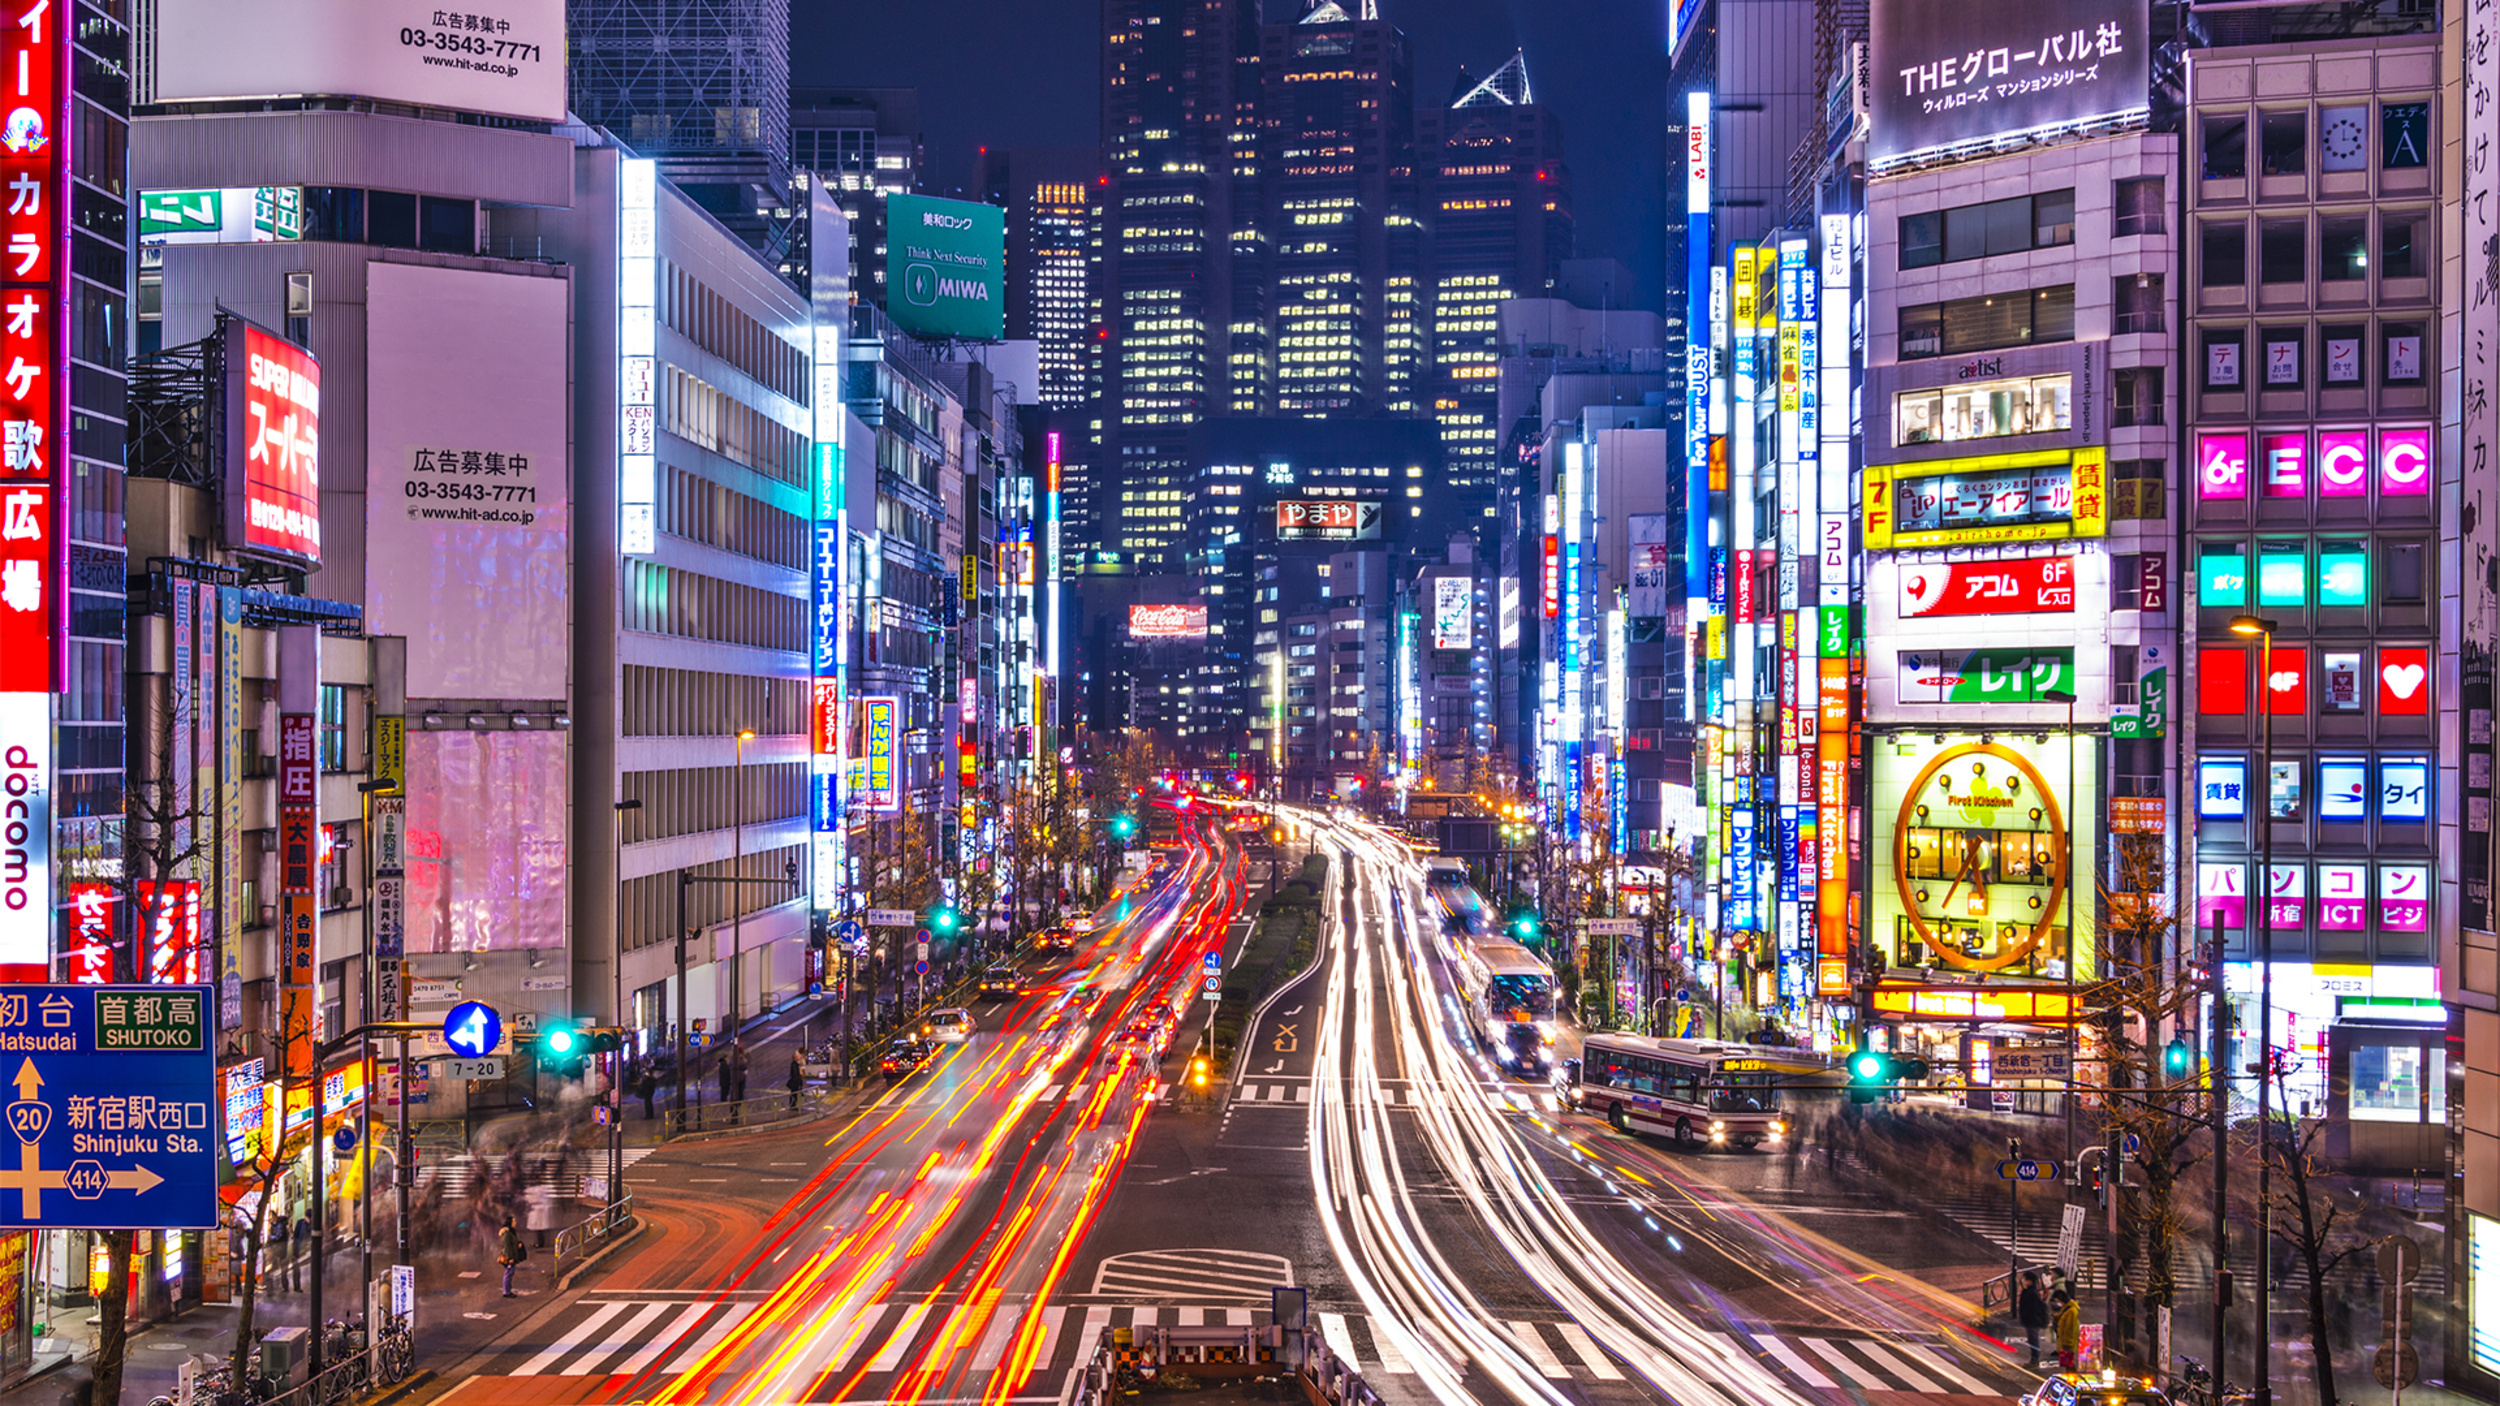 <p>There is no center in Tokyo. Unlike most cities, this sprawling city has multiple centers with their own distinct vibe. A great way to see Tokyo--the grand, magnificent, ever-changing Tokyo--is to wander the city's many neighborhoods. At the intersection of modern and ancient, Tokyo has so much to offer. </p><p><a href='https://www.msn.com/en-us/community/channel/vid-cj9pqbr0vn9in2b6ddcd8sfgpfq6x6utp44fssrv6mc2gtybw0us'>Did you enjoy this slideshow? Follow us on MSN to see more of our exclusive lifestyle content.</a></p>